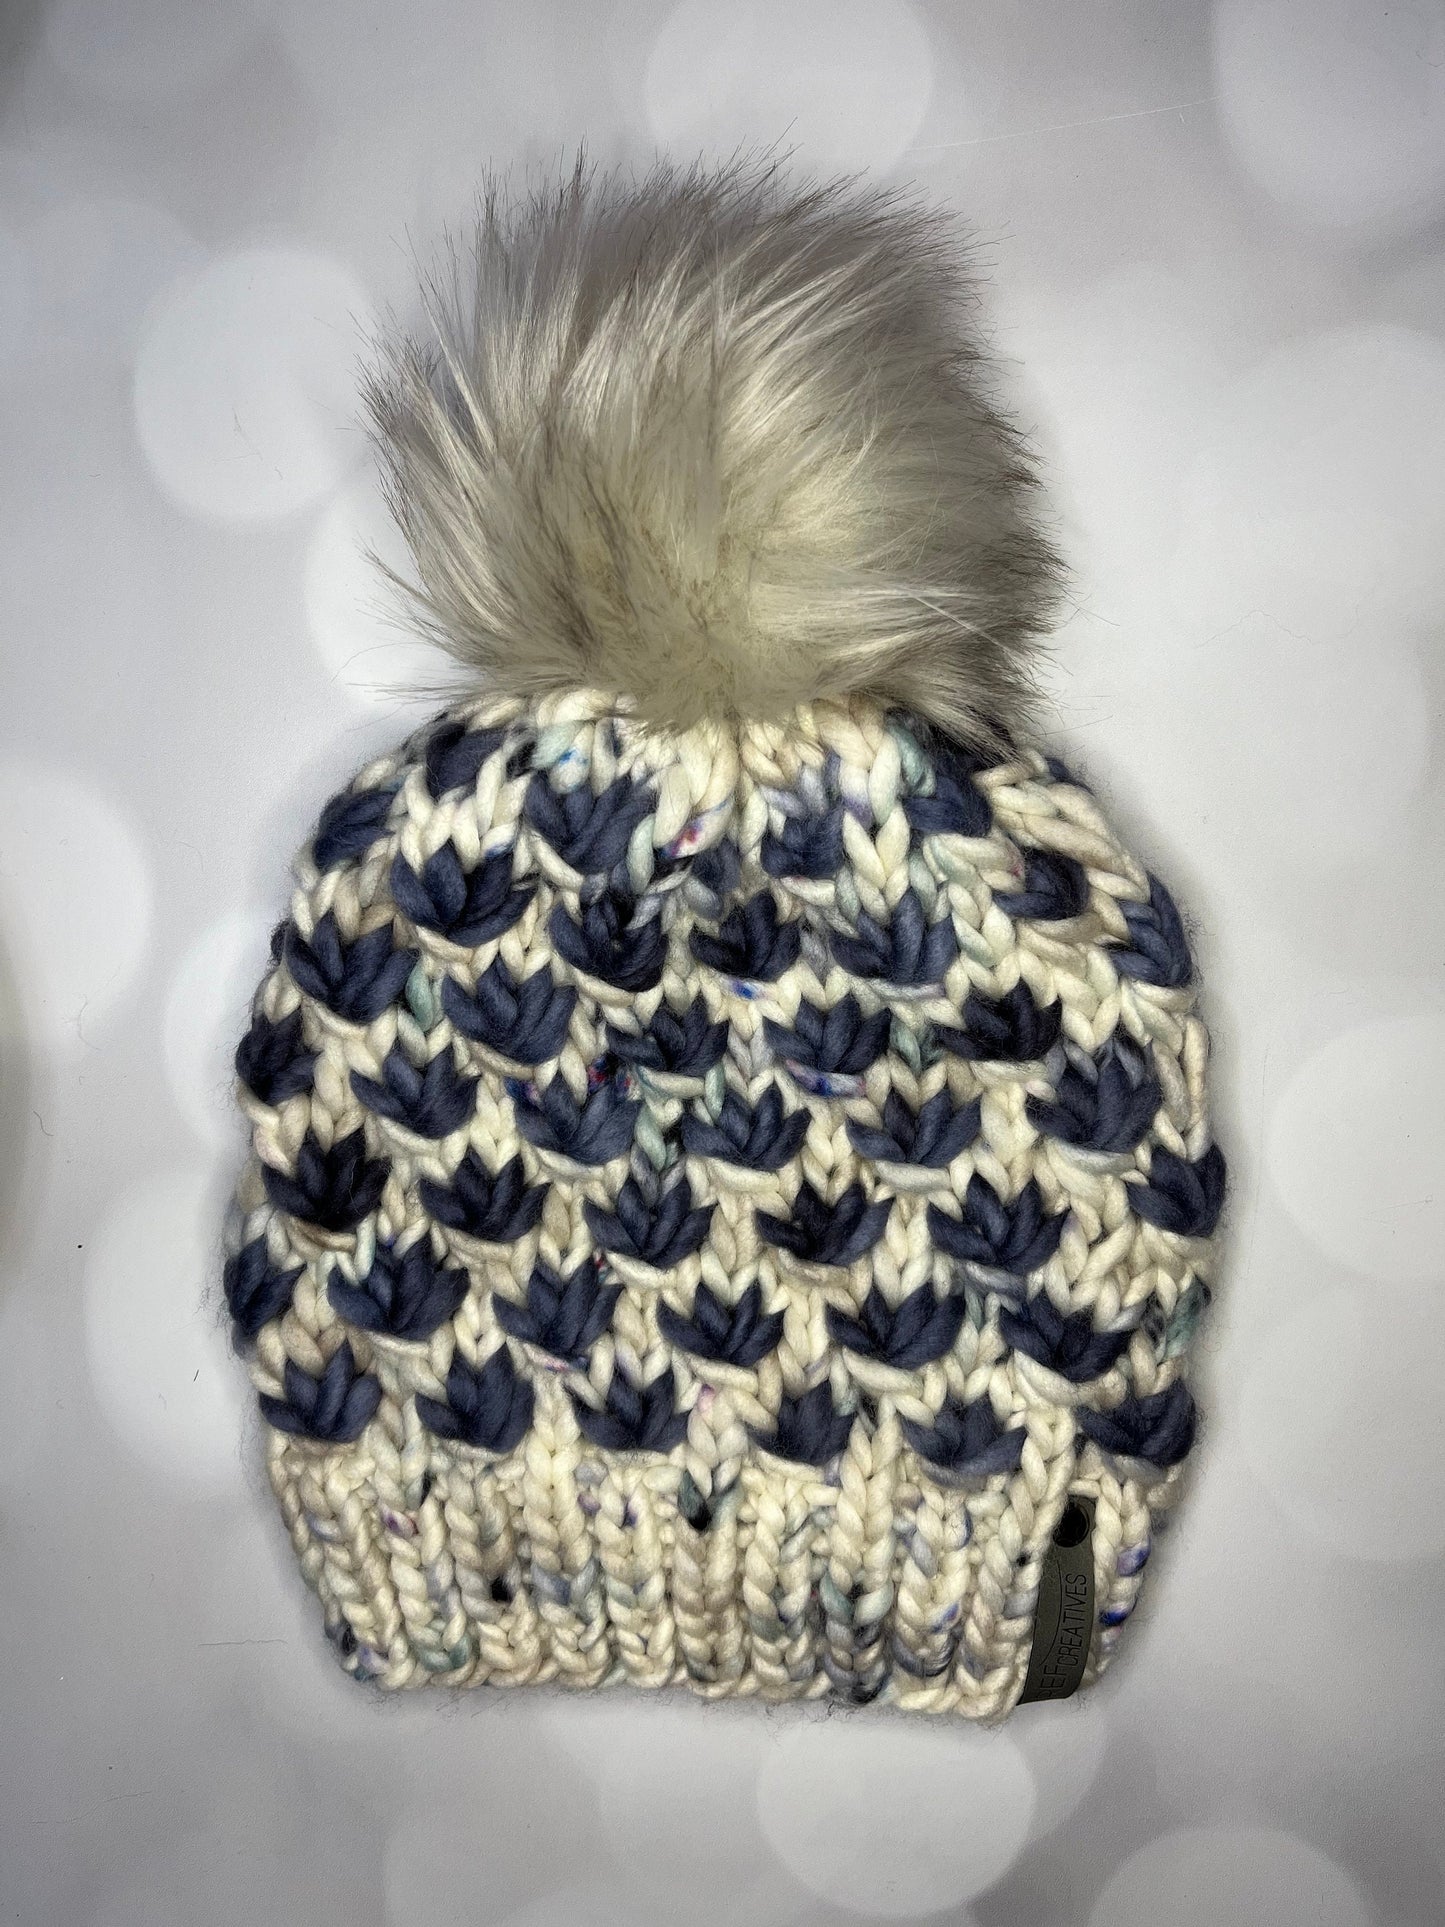 Luxury Blue Merino Wool Knit Hat - Speckled Grey and Slate Blue Lotus Flower Beanie Hand Knit Hat with Hand Dyed Yarn